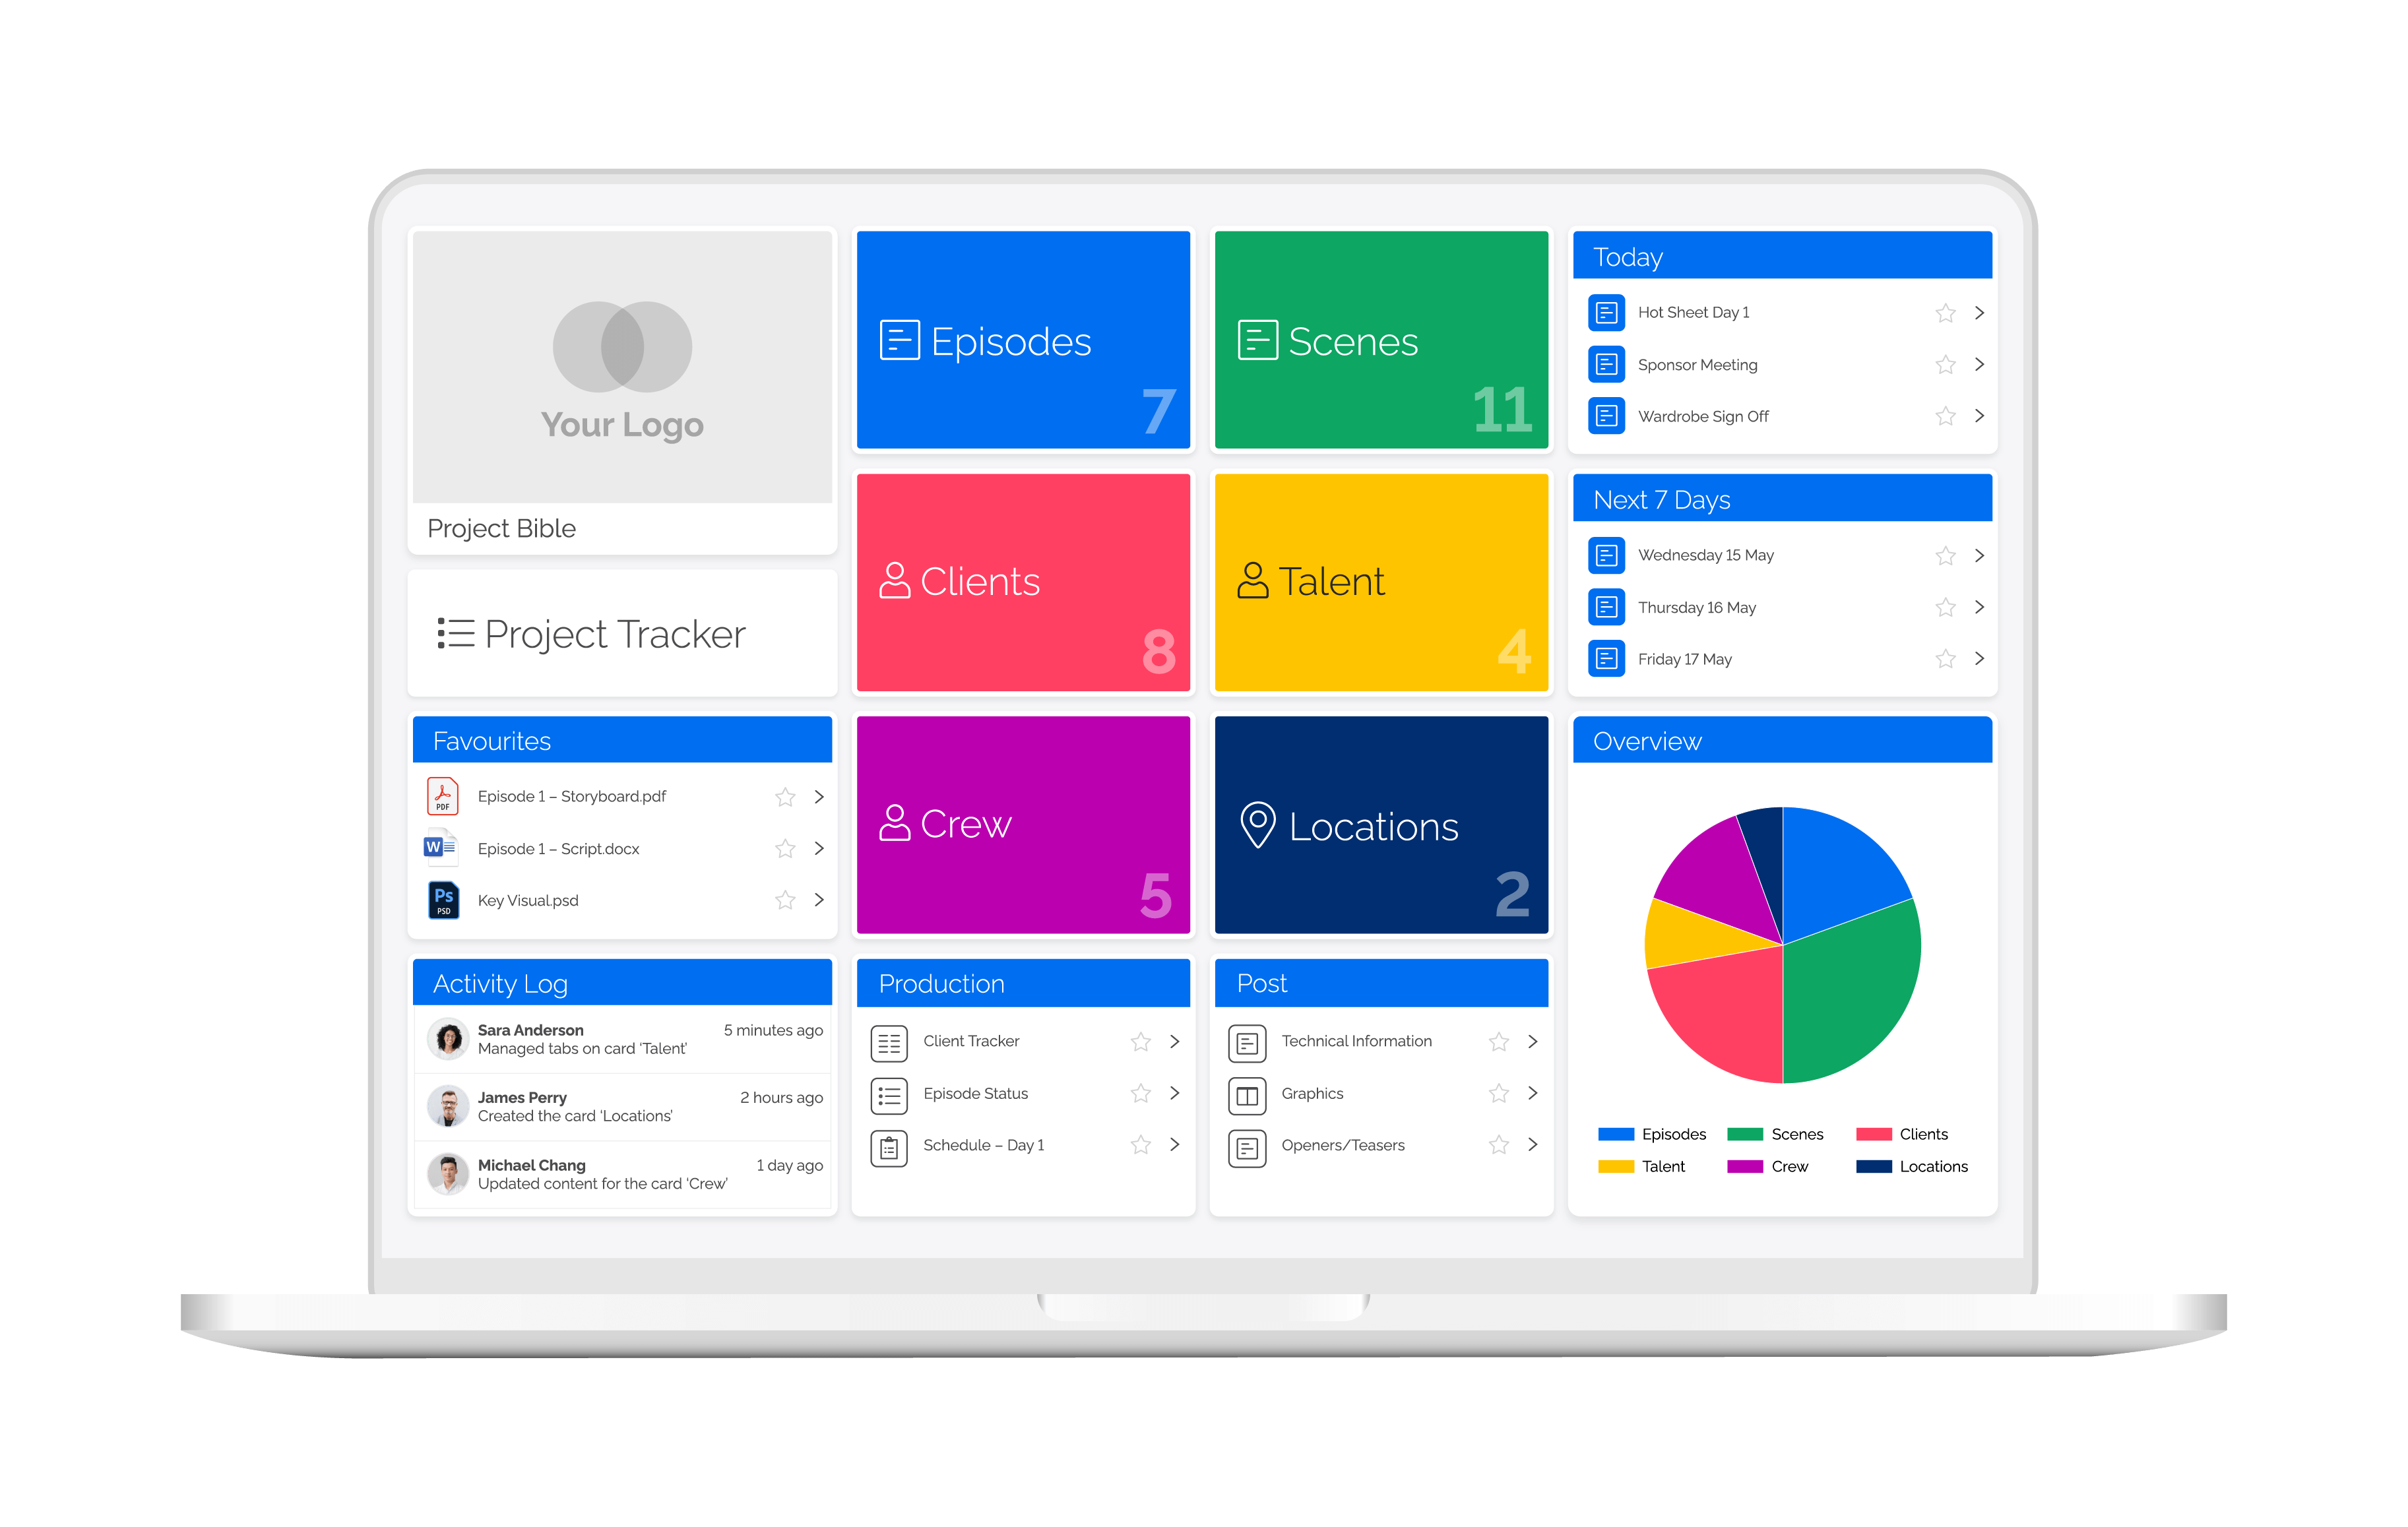 Lumi customisable dashboards for every team